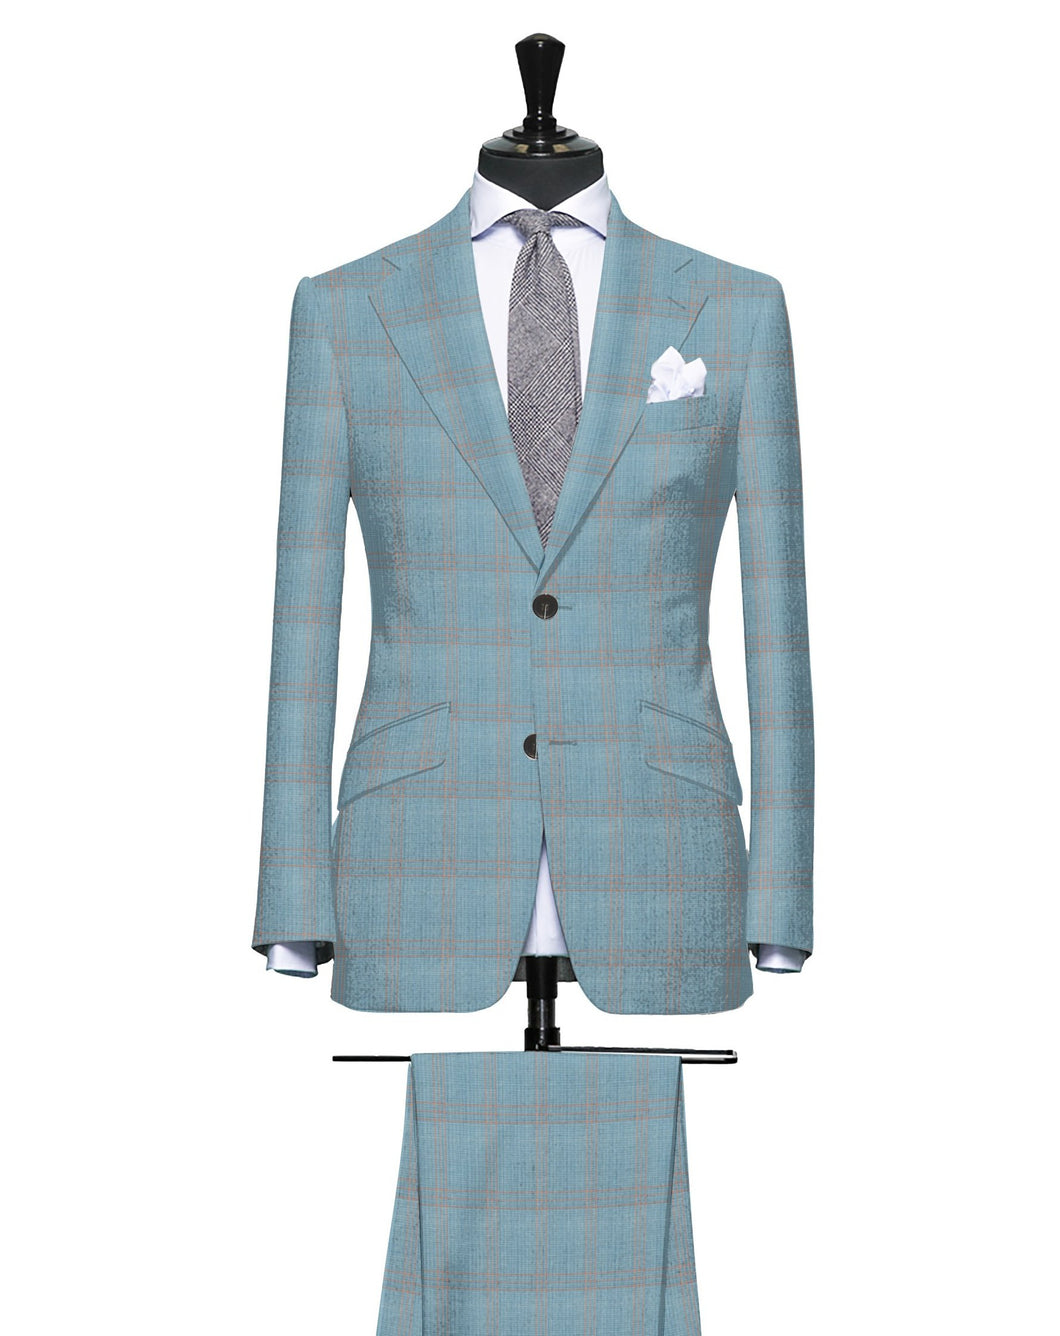 Fresh Light Teal with Sherbet Accent Pattern, Super 150, Wool